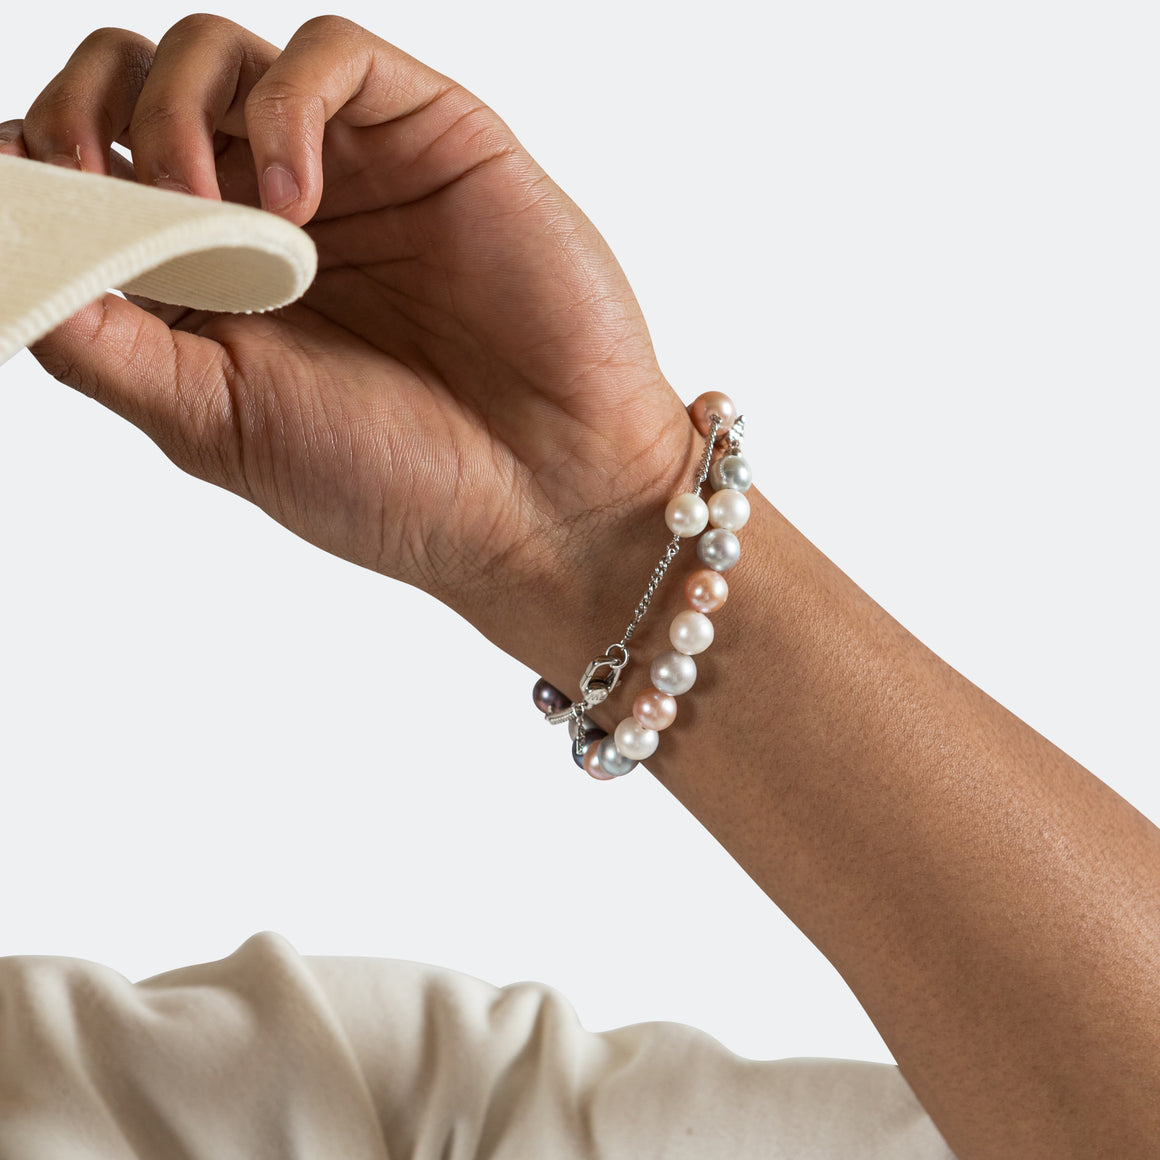 Polite Worldwide - PPF Multicolour Pearl Bracelet - 925 Silver - UP THERE